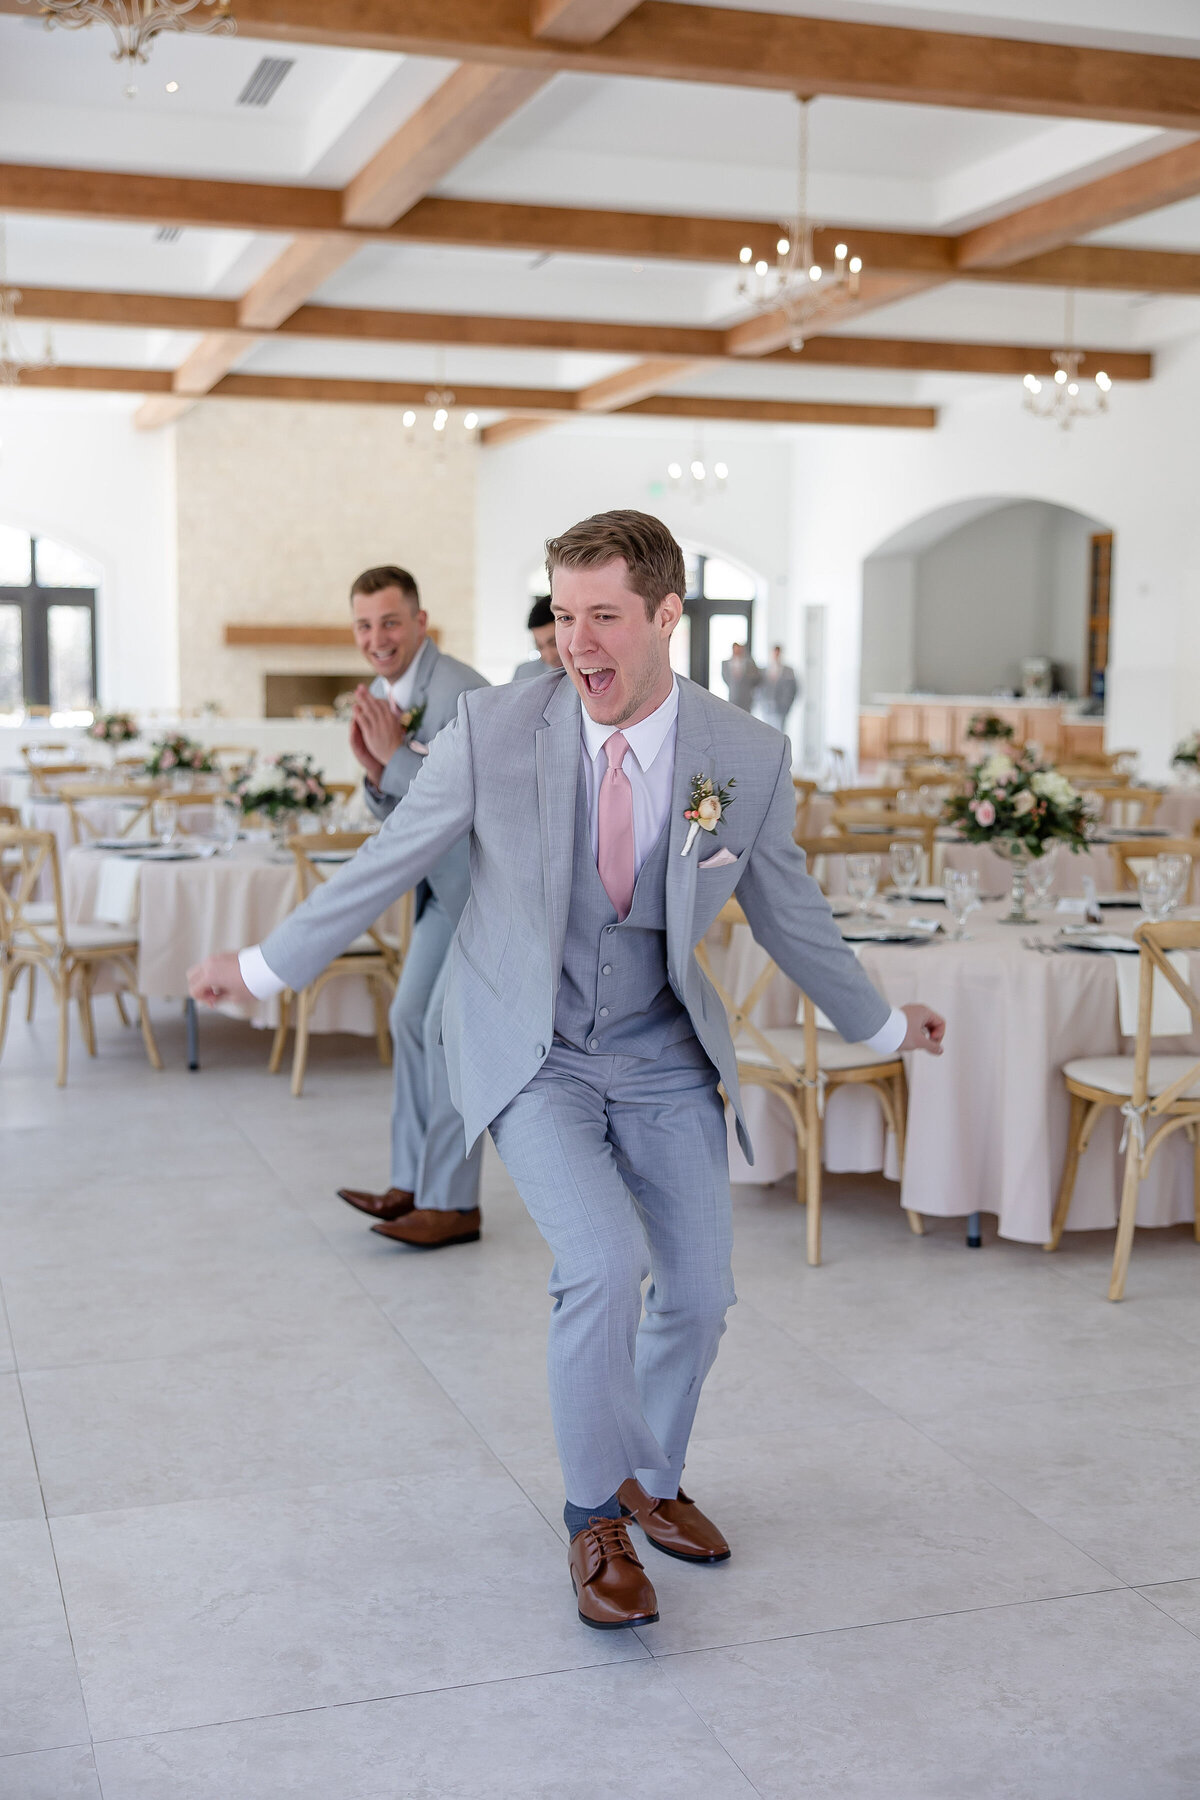 groomsman dances through reception room at The Preserve at Canyon Lake Texas wedding with pink tie